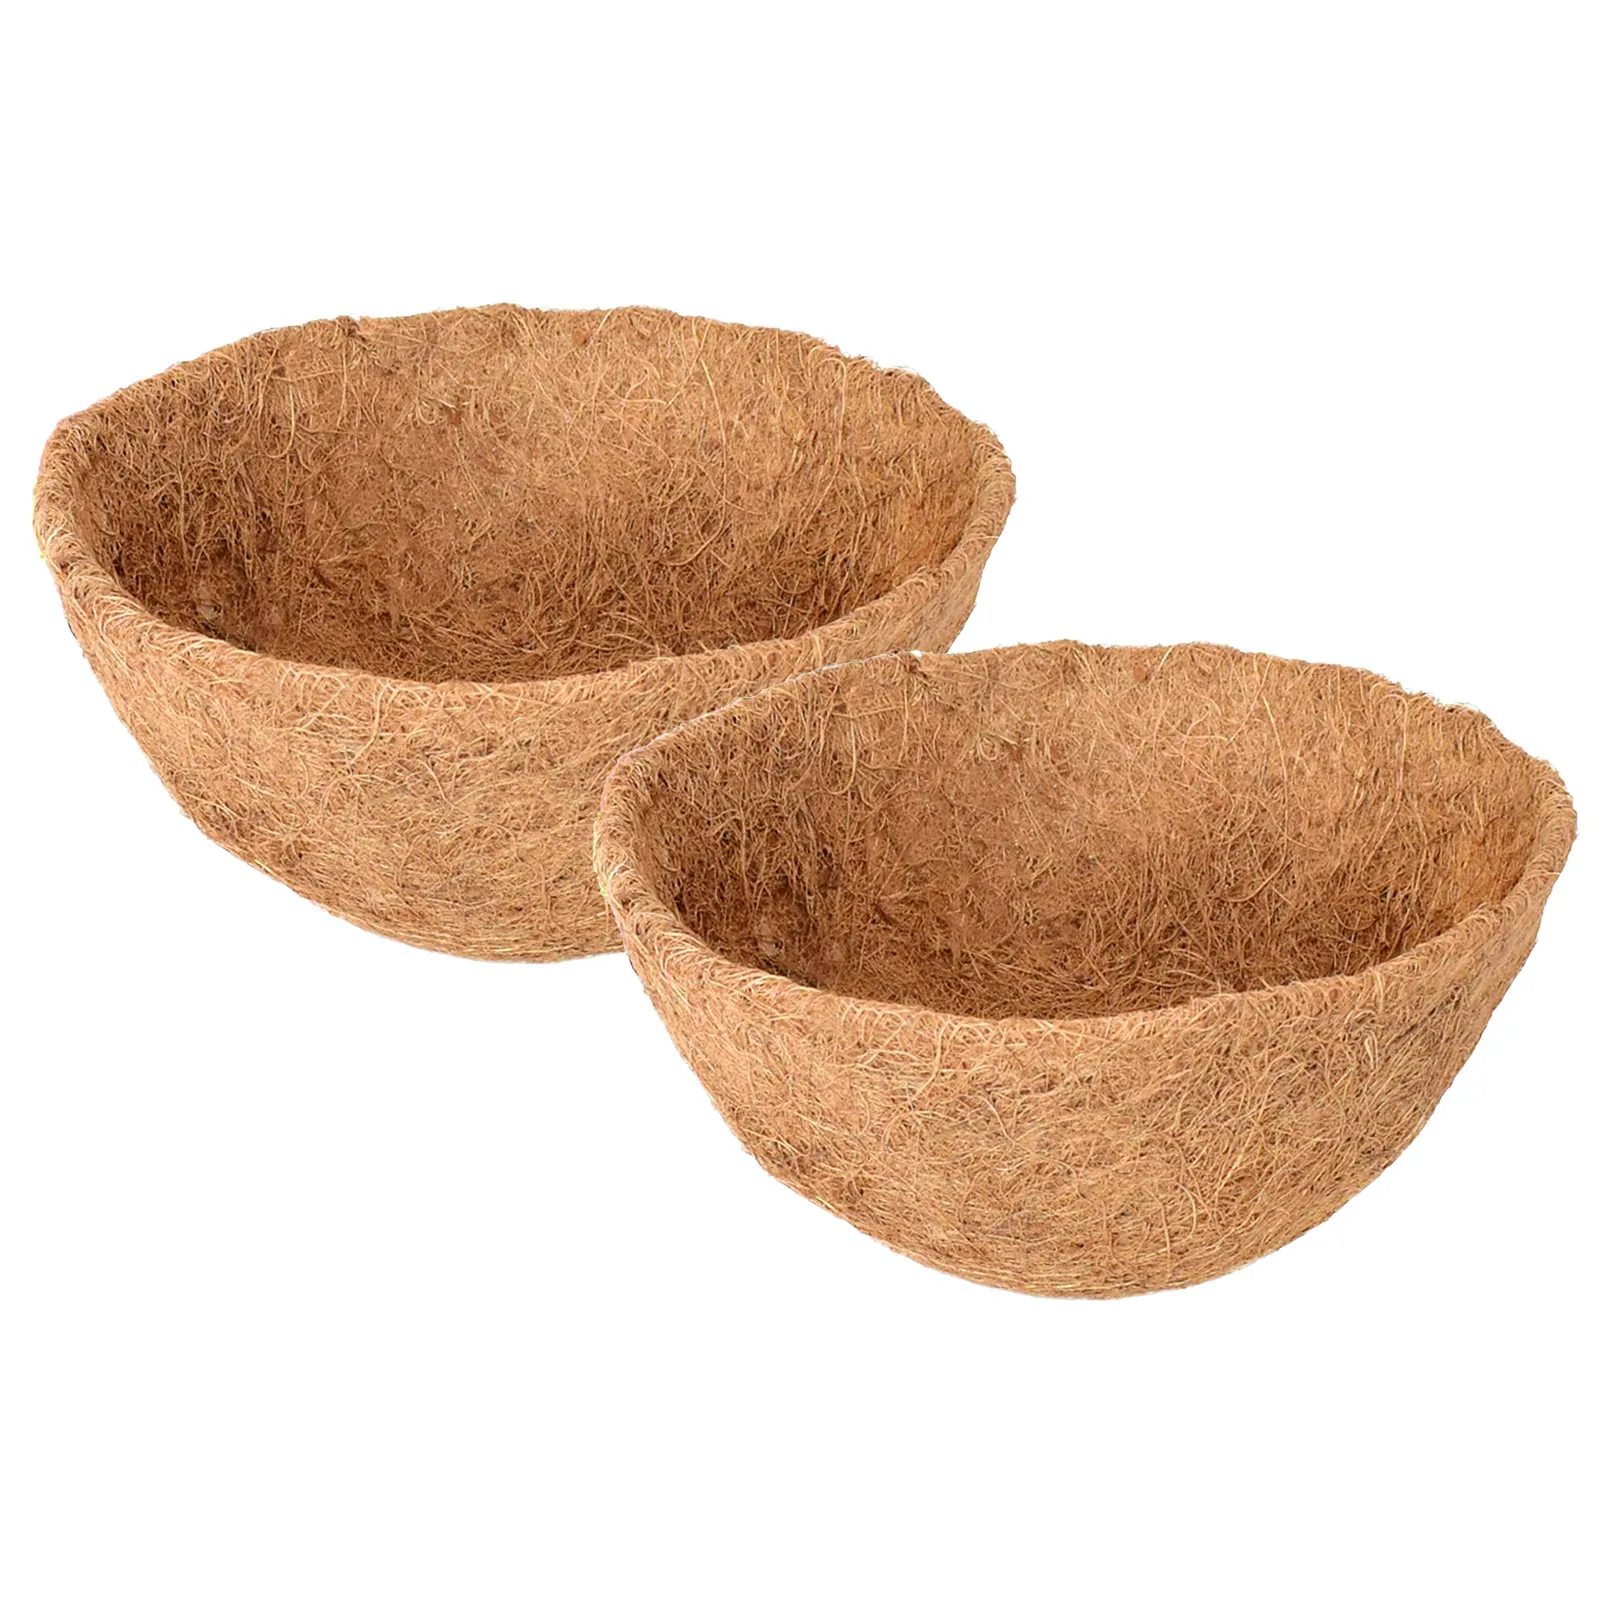 

2 Pieces Coco Liners for Planters Round Coconut Fiber Liner for Garden Flower Pot Replacement Coco Fiber Liners for Planting